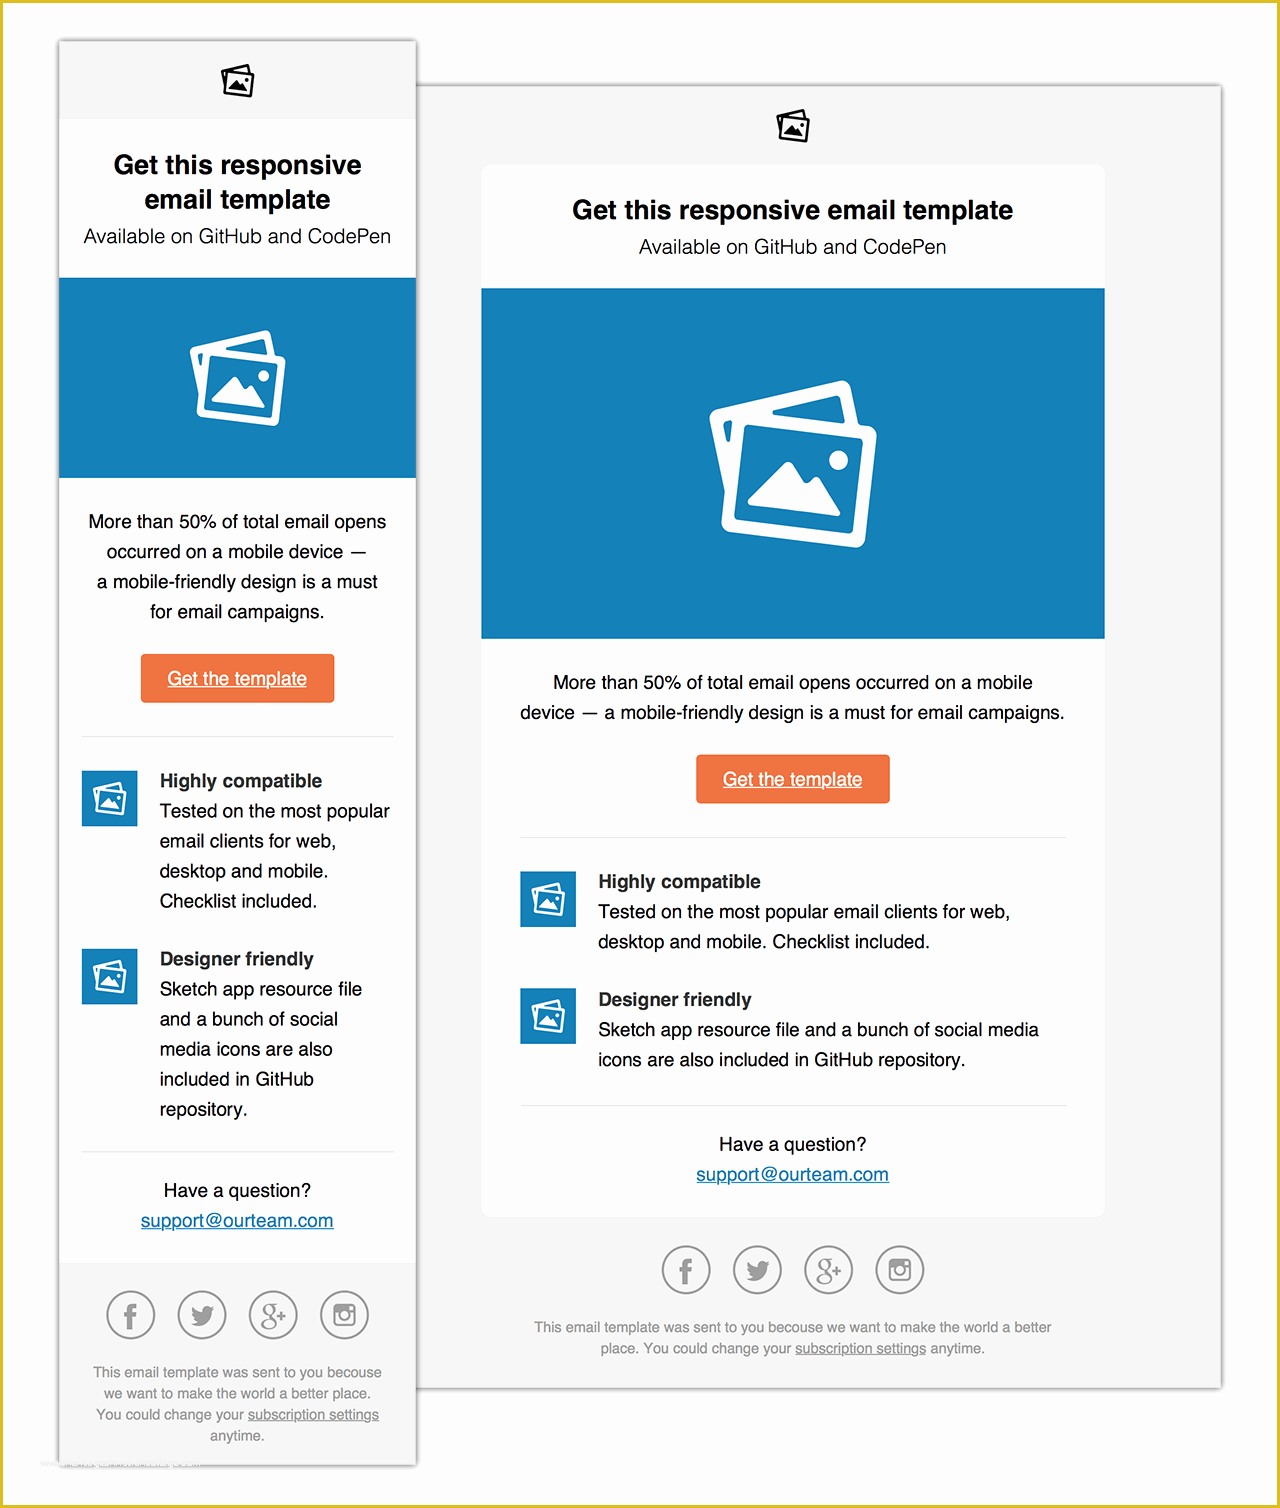 Free Convertkit Email Template Of Email Templates by Konsav